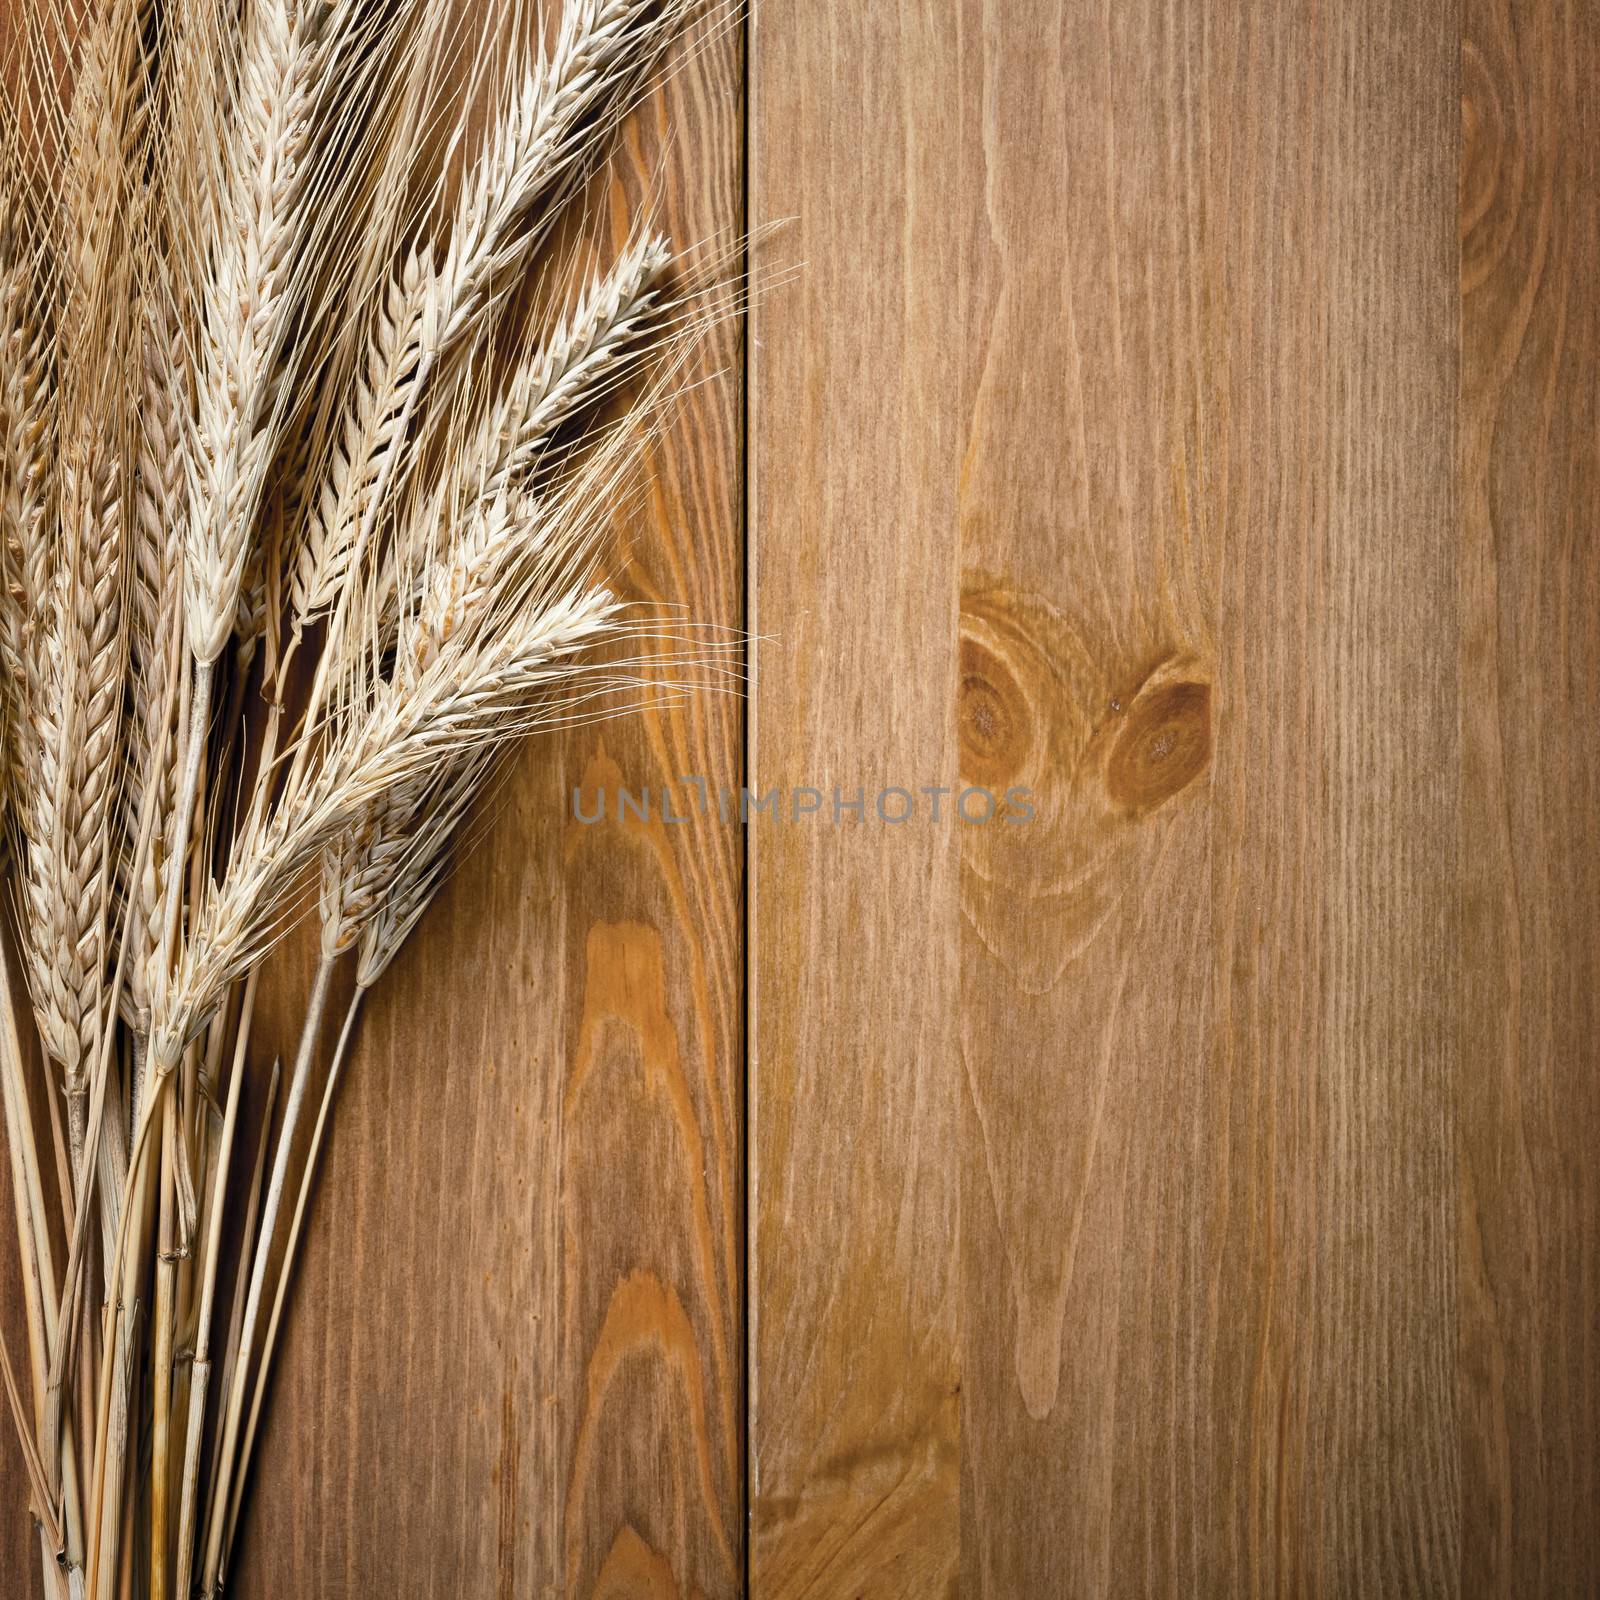 Wheat ears on wooden table background. Top view